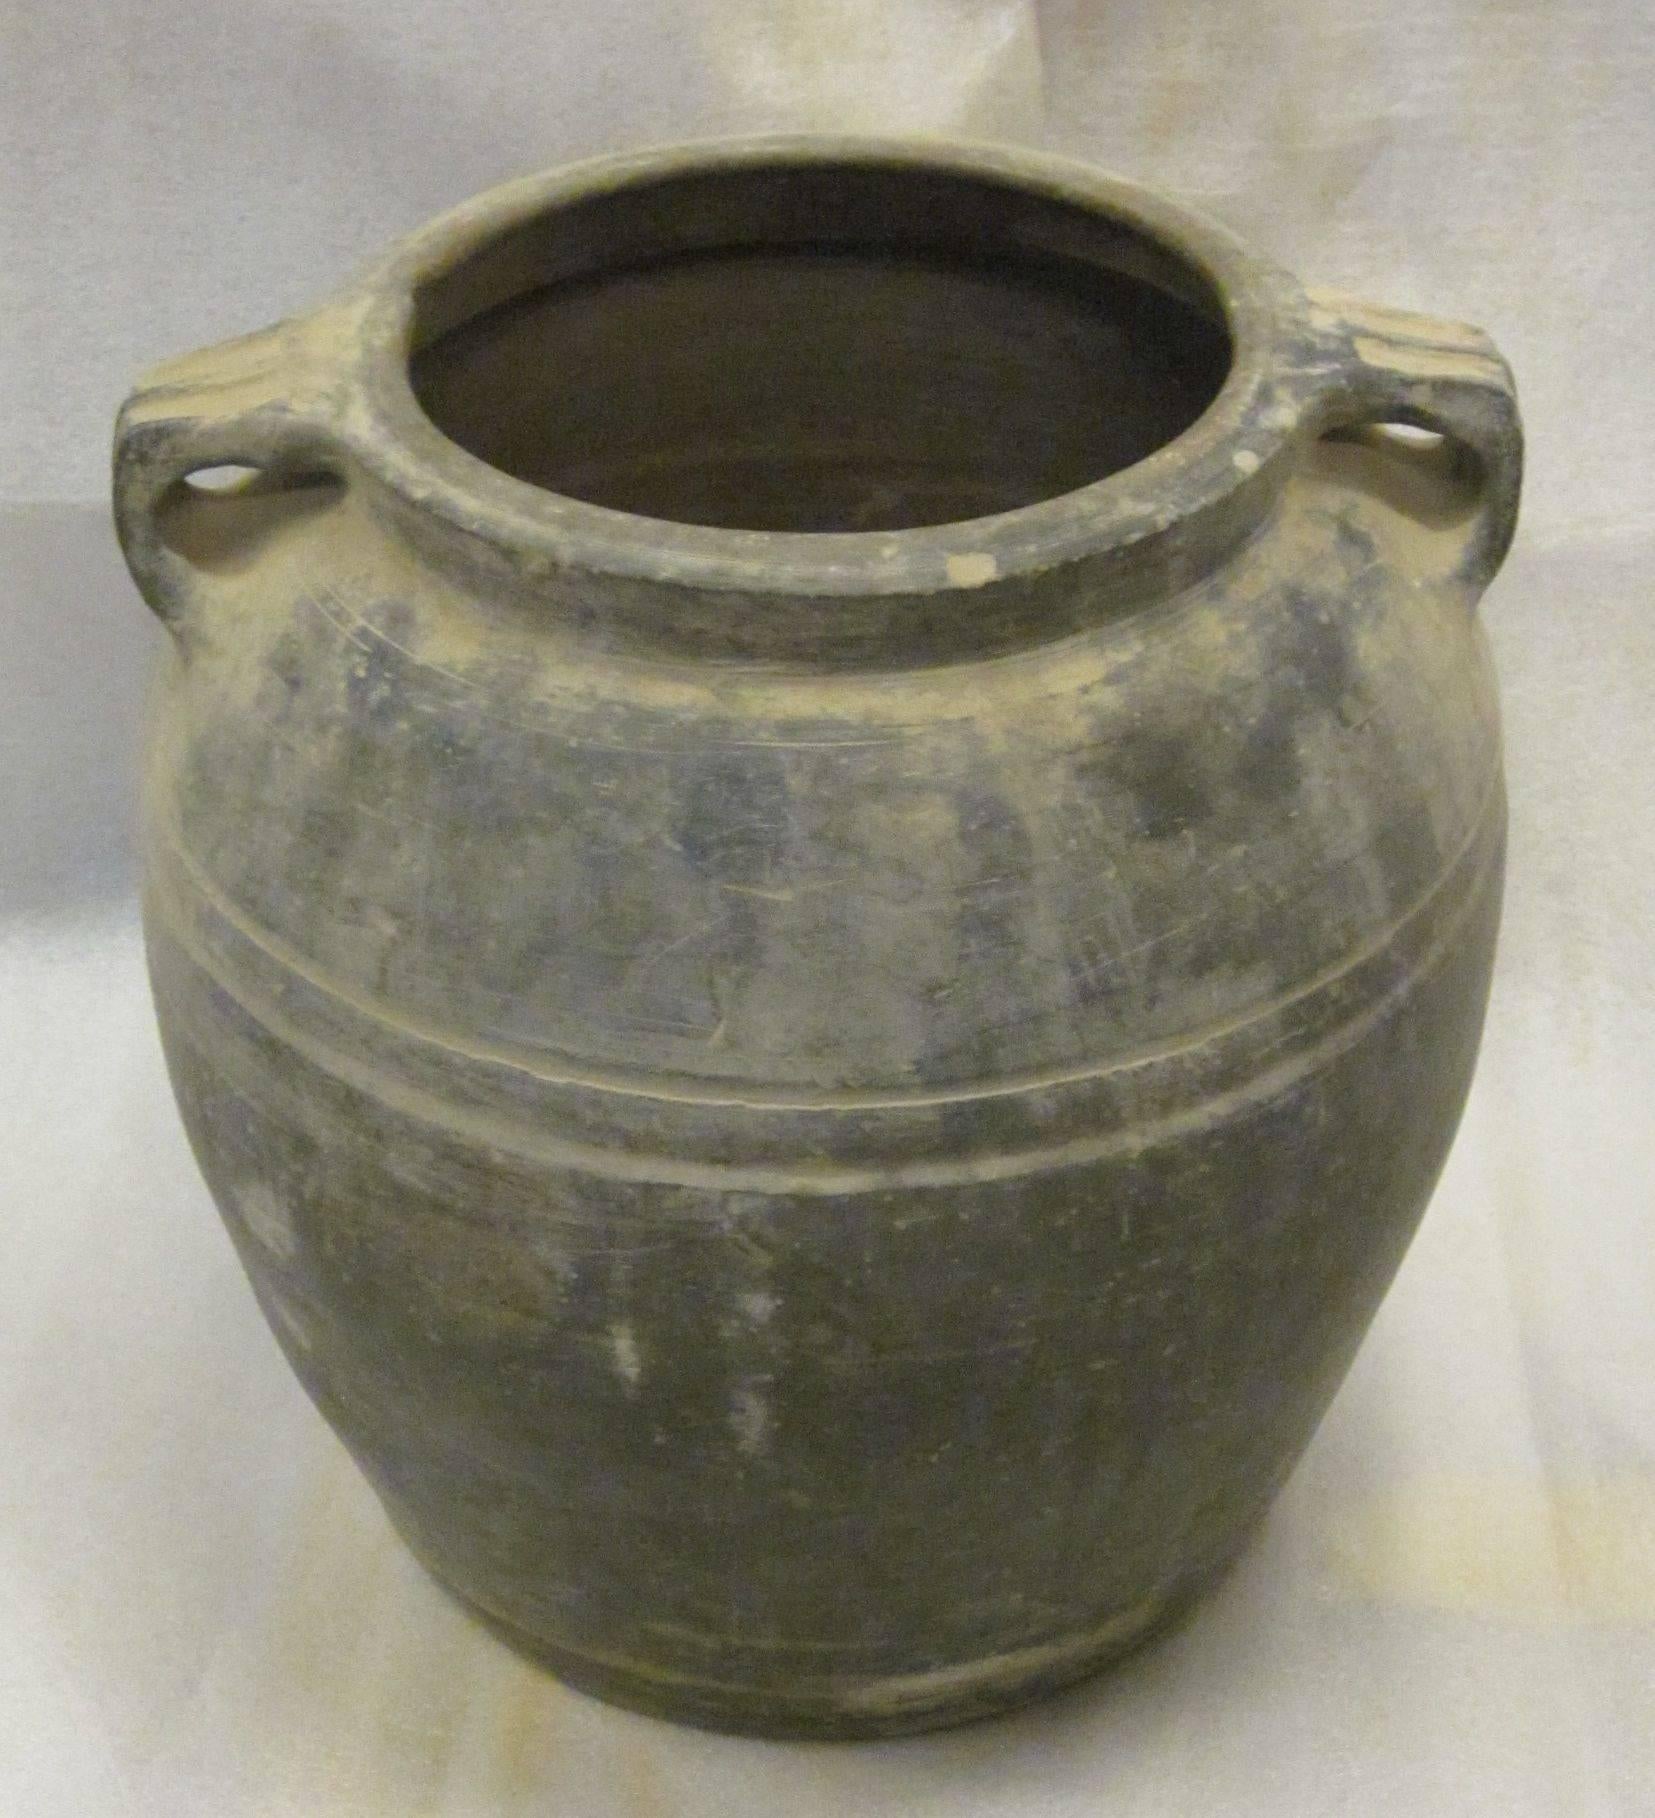 Late 20th century Chinese charcoal terra cotta food vessels.
An assortment of sizes and shapes are available and sold individually.
Sizes range from medium to extra extra large.
Measurements are:
XXL  16